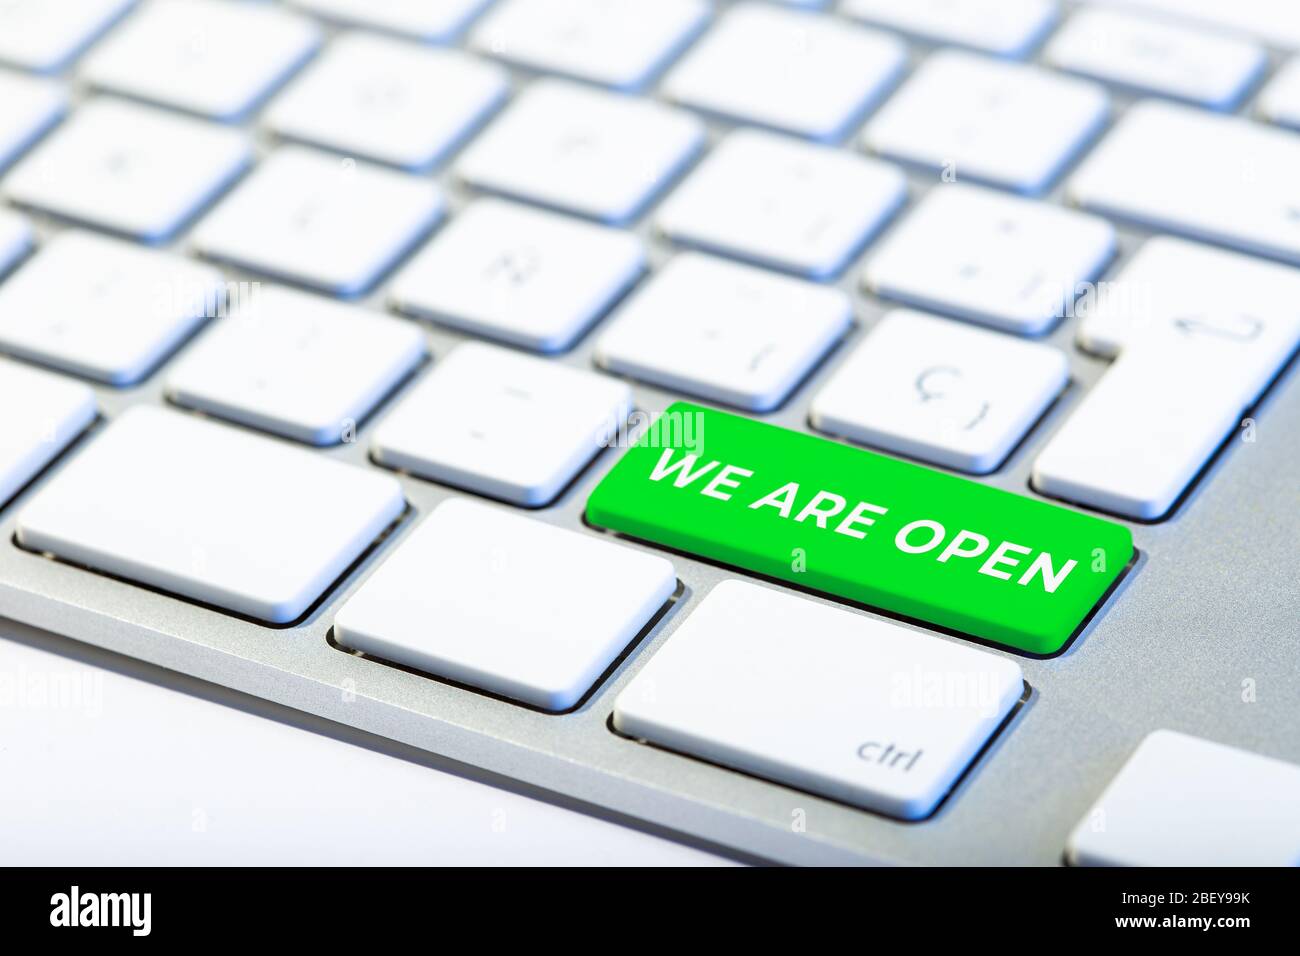 We are open concept. Keyboard with green key and text Stock Photo